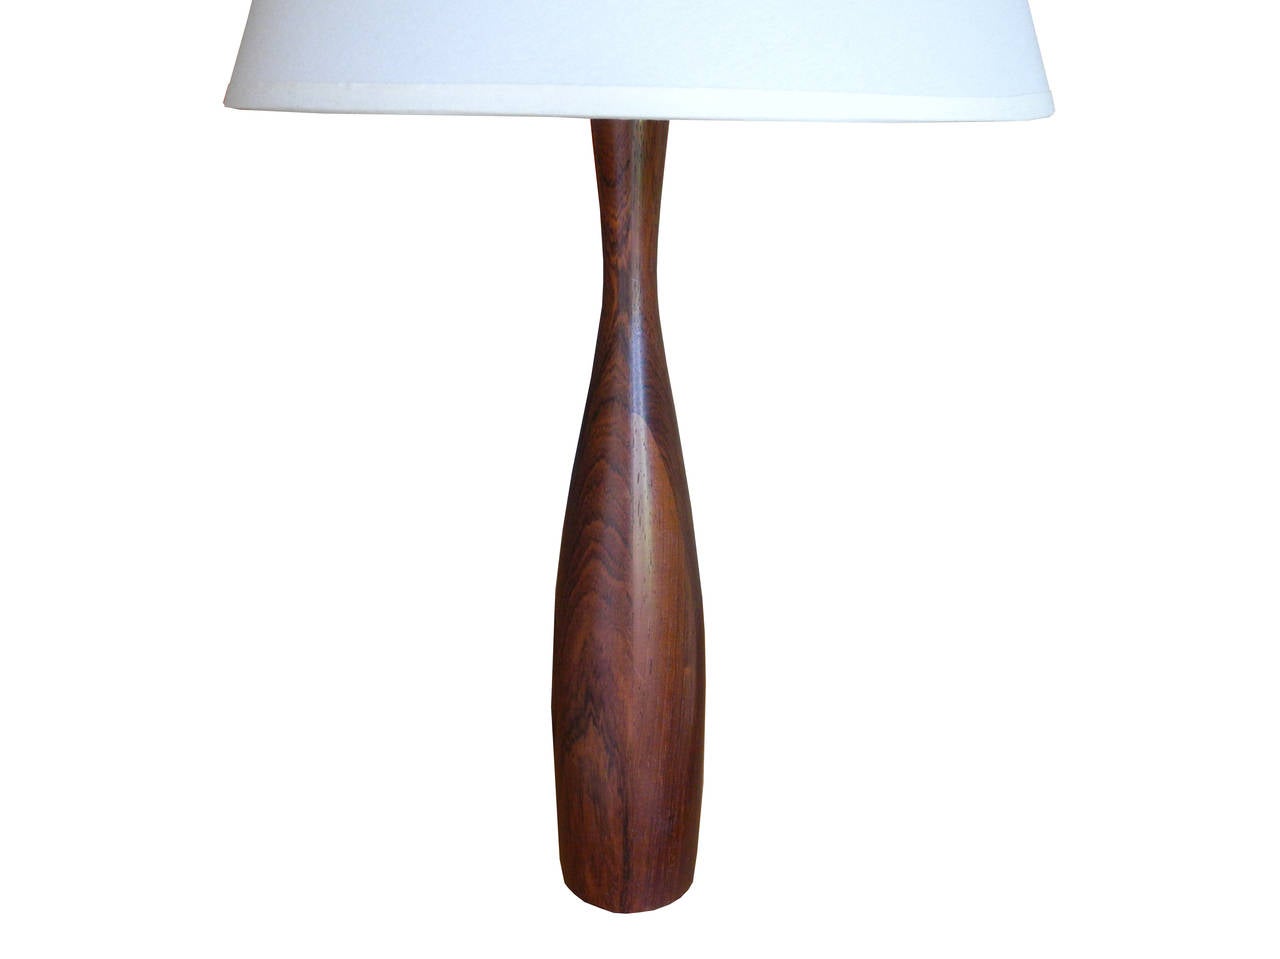 Made in Brazil of solid rosewood. The table lamp is petit.
Perfect for a small table, desk or nightstand. The top of the finial is 23.5